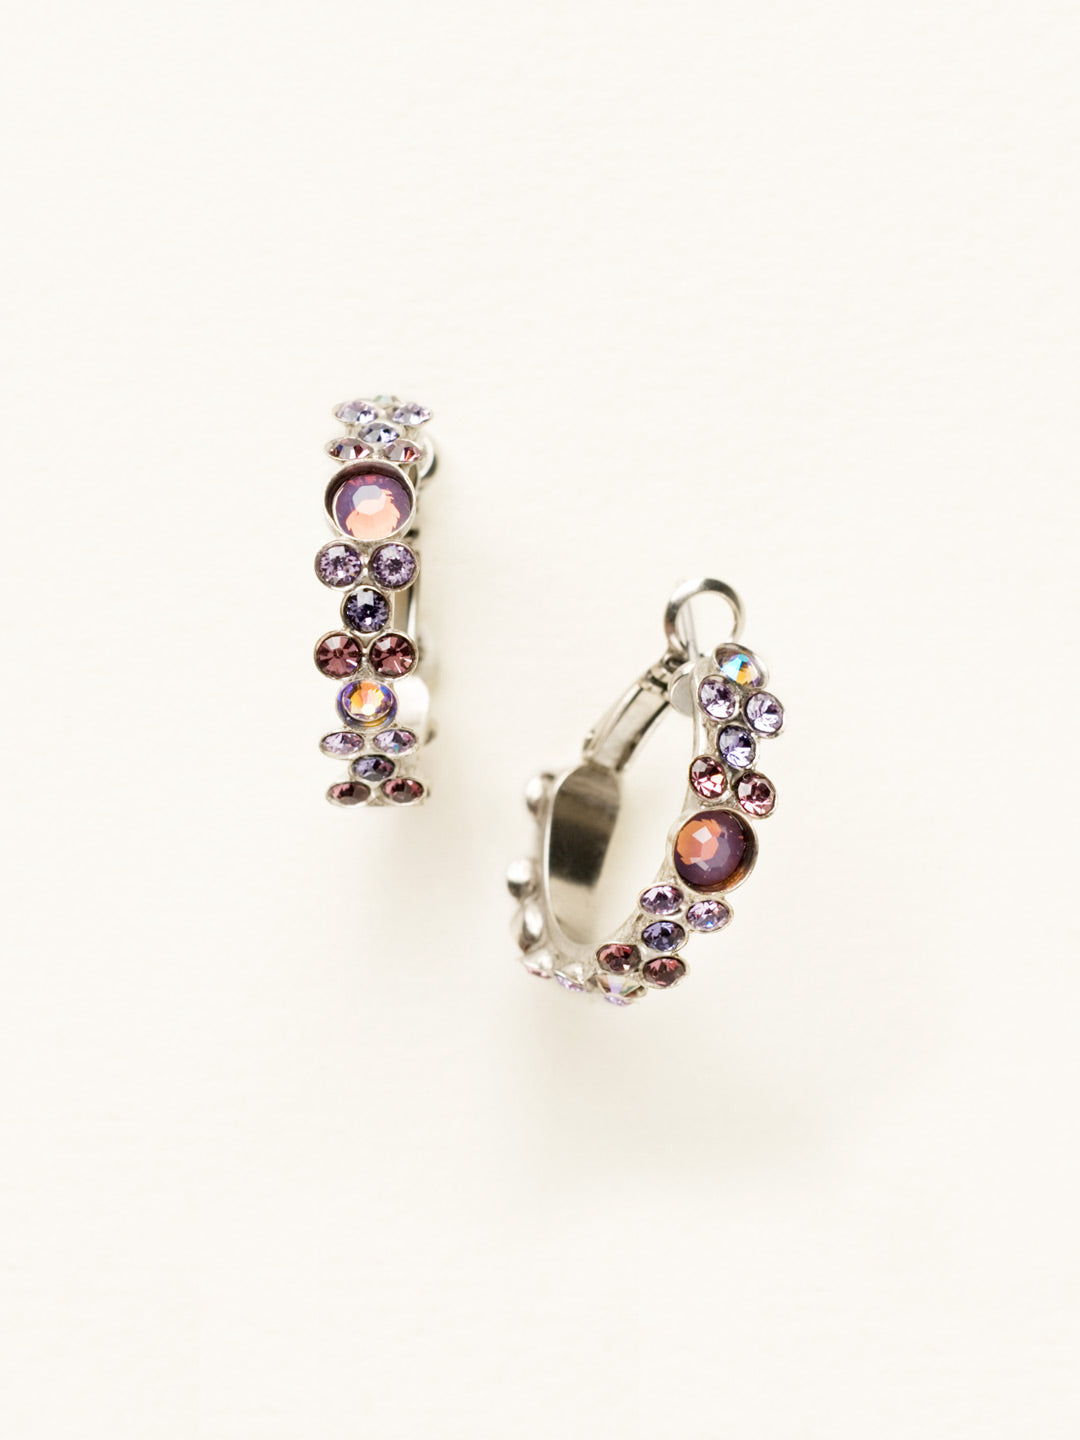 Floral Hoop Earrings - EBP15ASVE - <p>Intricate design, infused with gorgeous shine. A motif of floral clusters is featured here on a small, delicate hoop with a hinged post backing. From Sorrelli's Violet Eyes collection in our Antique Silver-tone finish.</p>